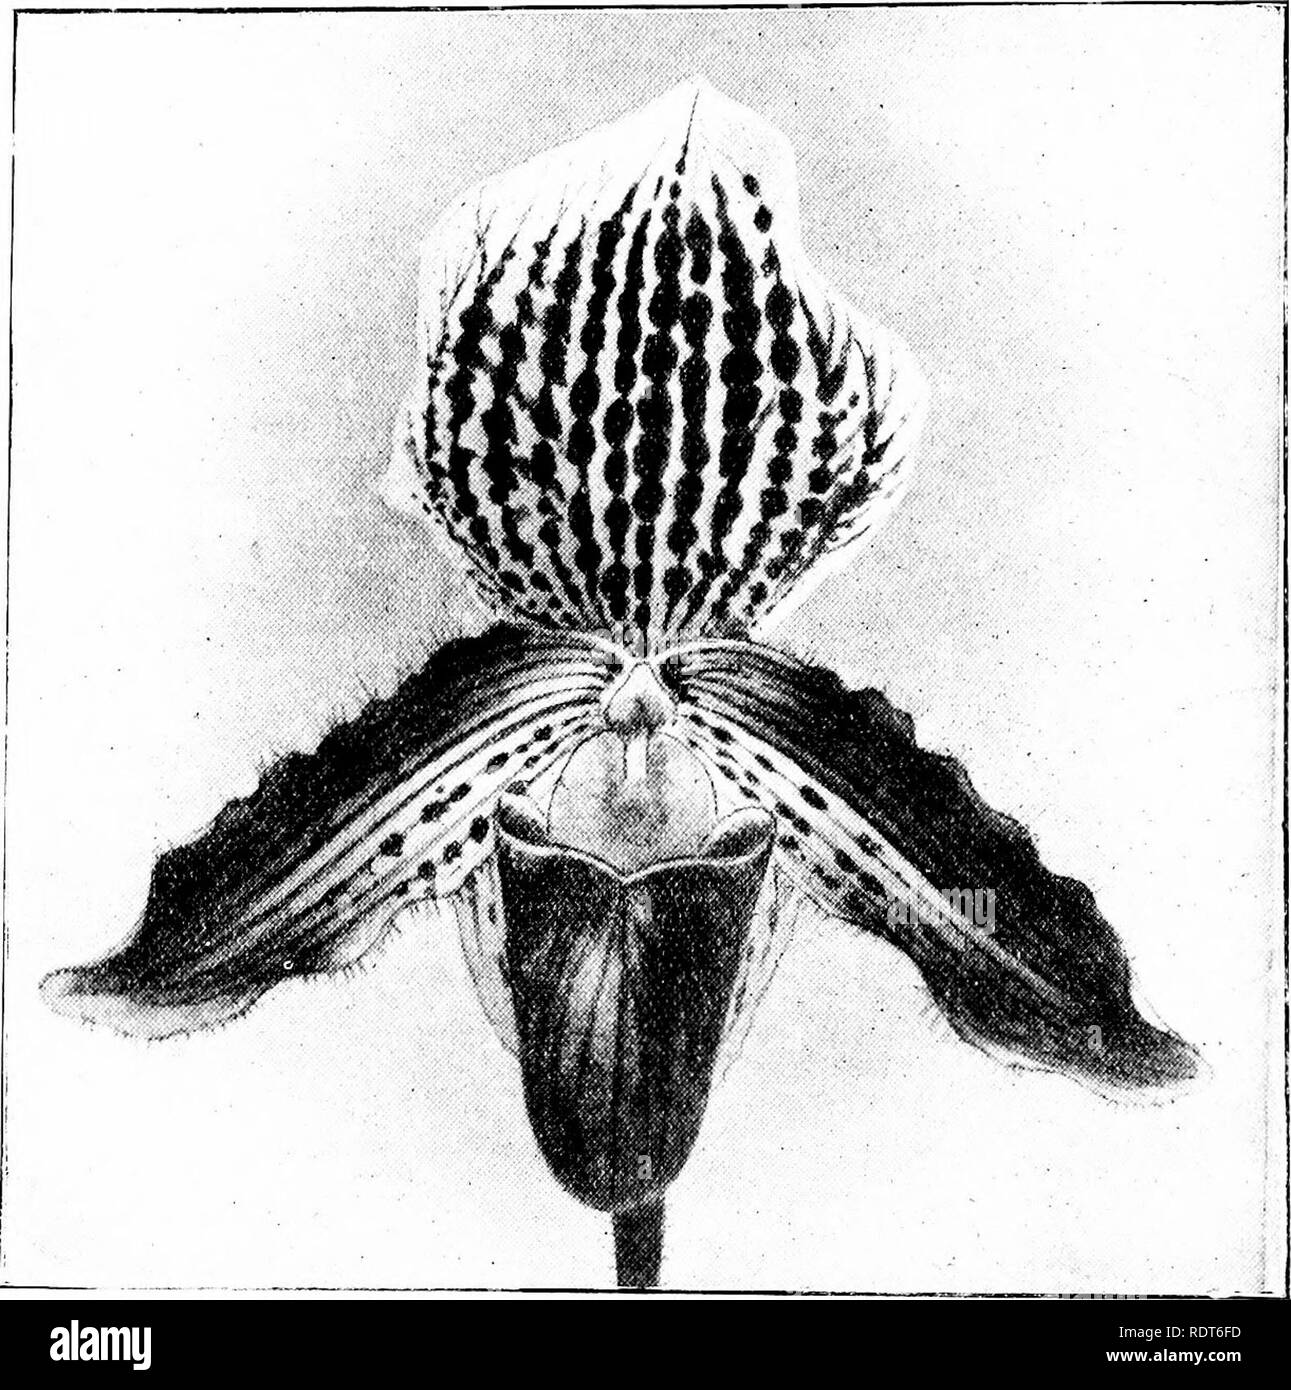 . The orchid stud-book: an enumeration of hybrid orchids of artificial origin, with their parents, raisers, date of first flowering, references to descriptions and figures, and synonymy. With an historical introduction and 120 figures and a chapter on hybridising and raising orchids from seed. Orchids. 204 THE ORCHID STUD-BOOK. [Part II. C. x Paulii, hind xii. t. 571.âMiteau. C X Caroline, G.C. 1903, i. 46; Rev. H. Beige, 1903, 47.- Janssens &amp; Putzeys. C. X Chantino-Boxallii, J. S. H. Fr. 1899, 55.âBleu. C. x fulshawense, G.C. 1903, ii. 340 ; O.R. 1903, 363. âE. Ashworth. 531. P. X Schofle Stock Photo